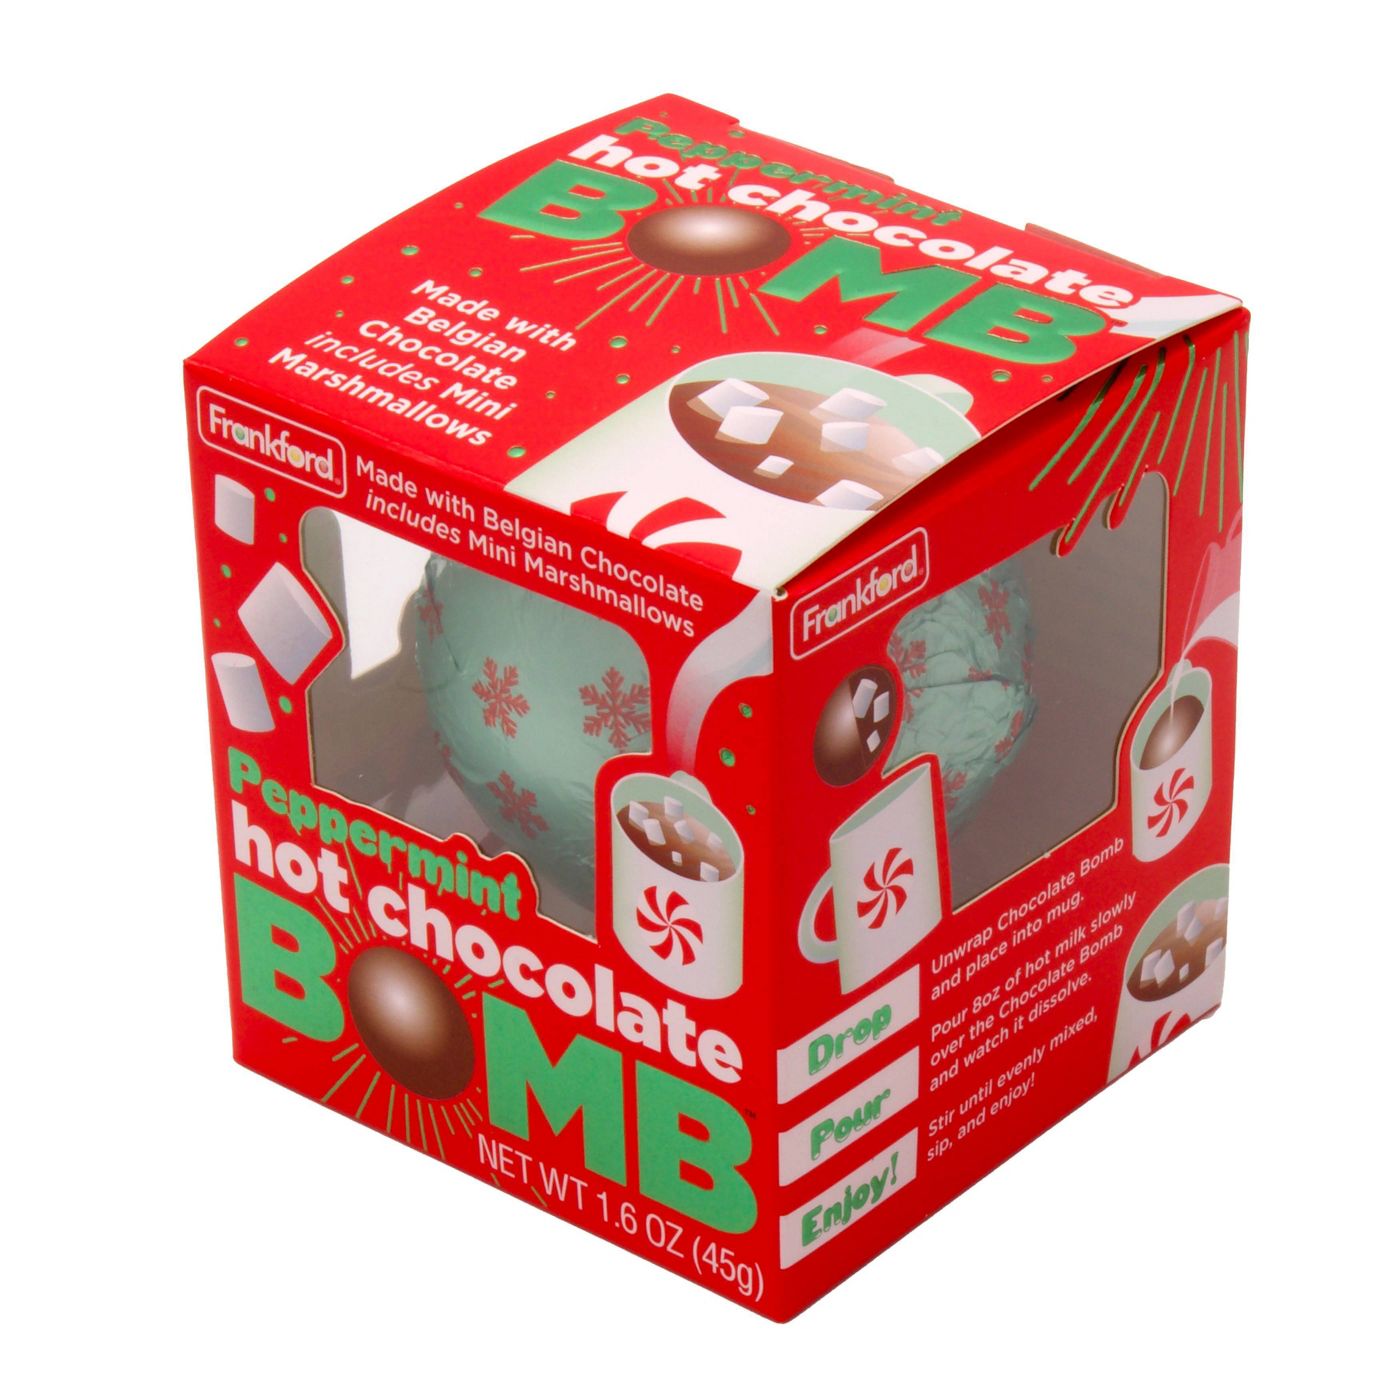 Frankford Peppermint Hot Chocolate Bomb, 1.6oz